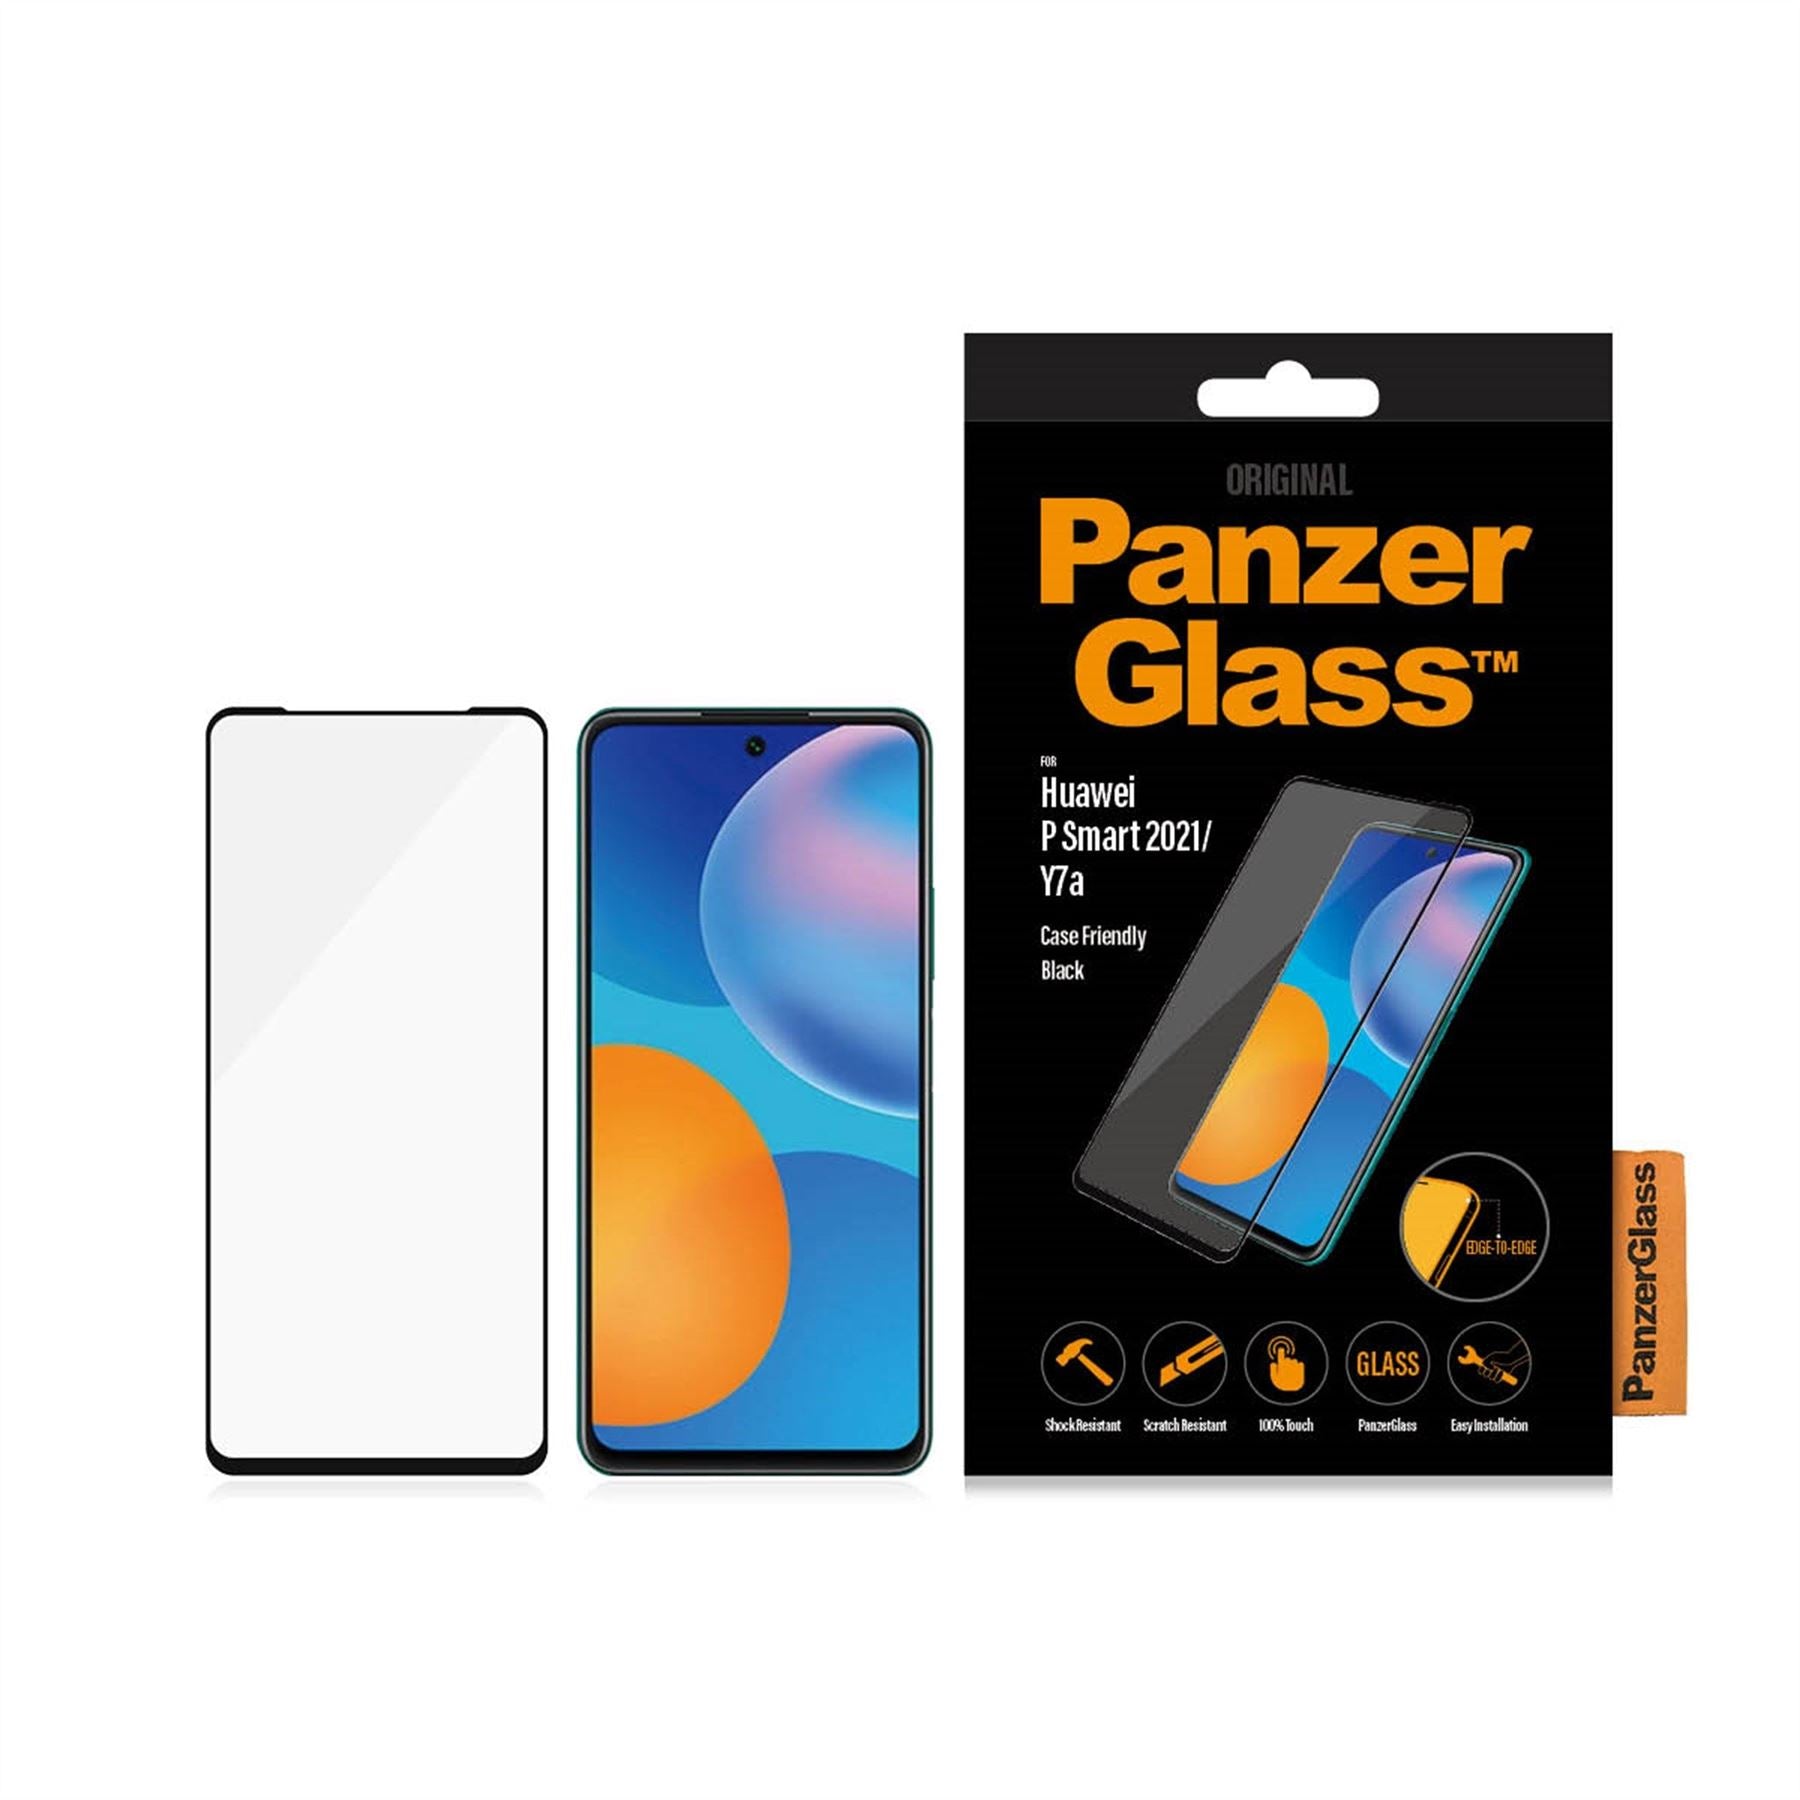 Official  Panzer Glass Black for Huawei P Smart 2021 - PZ5384